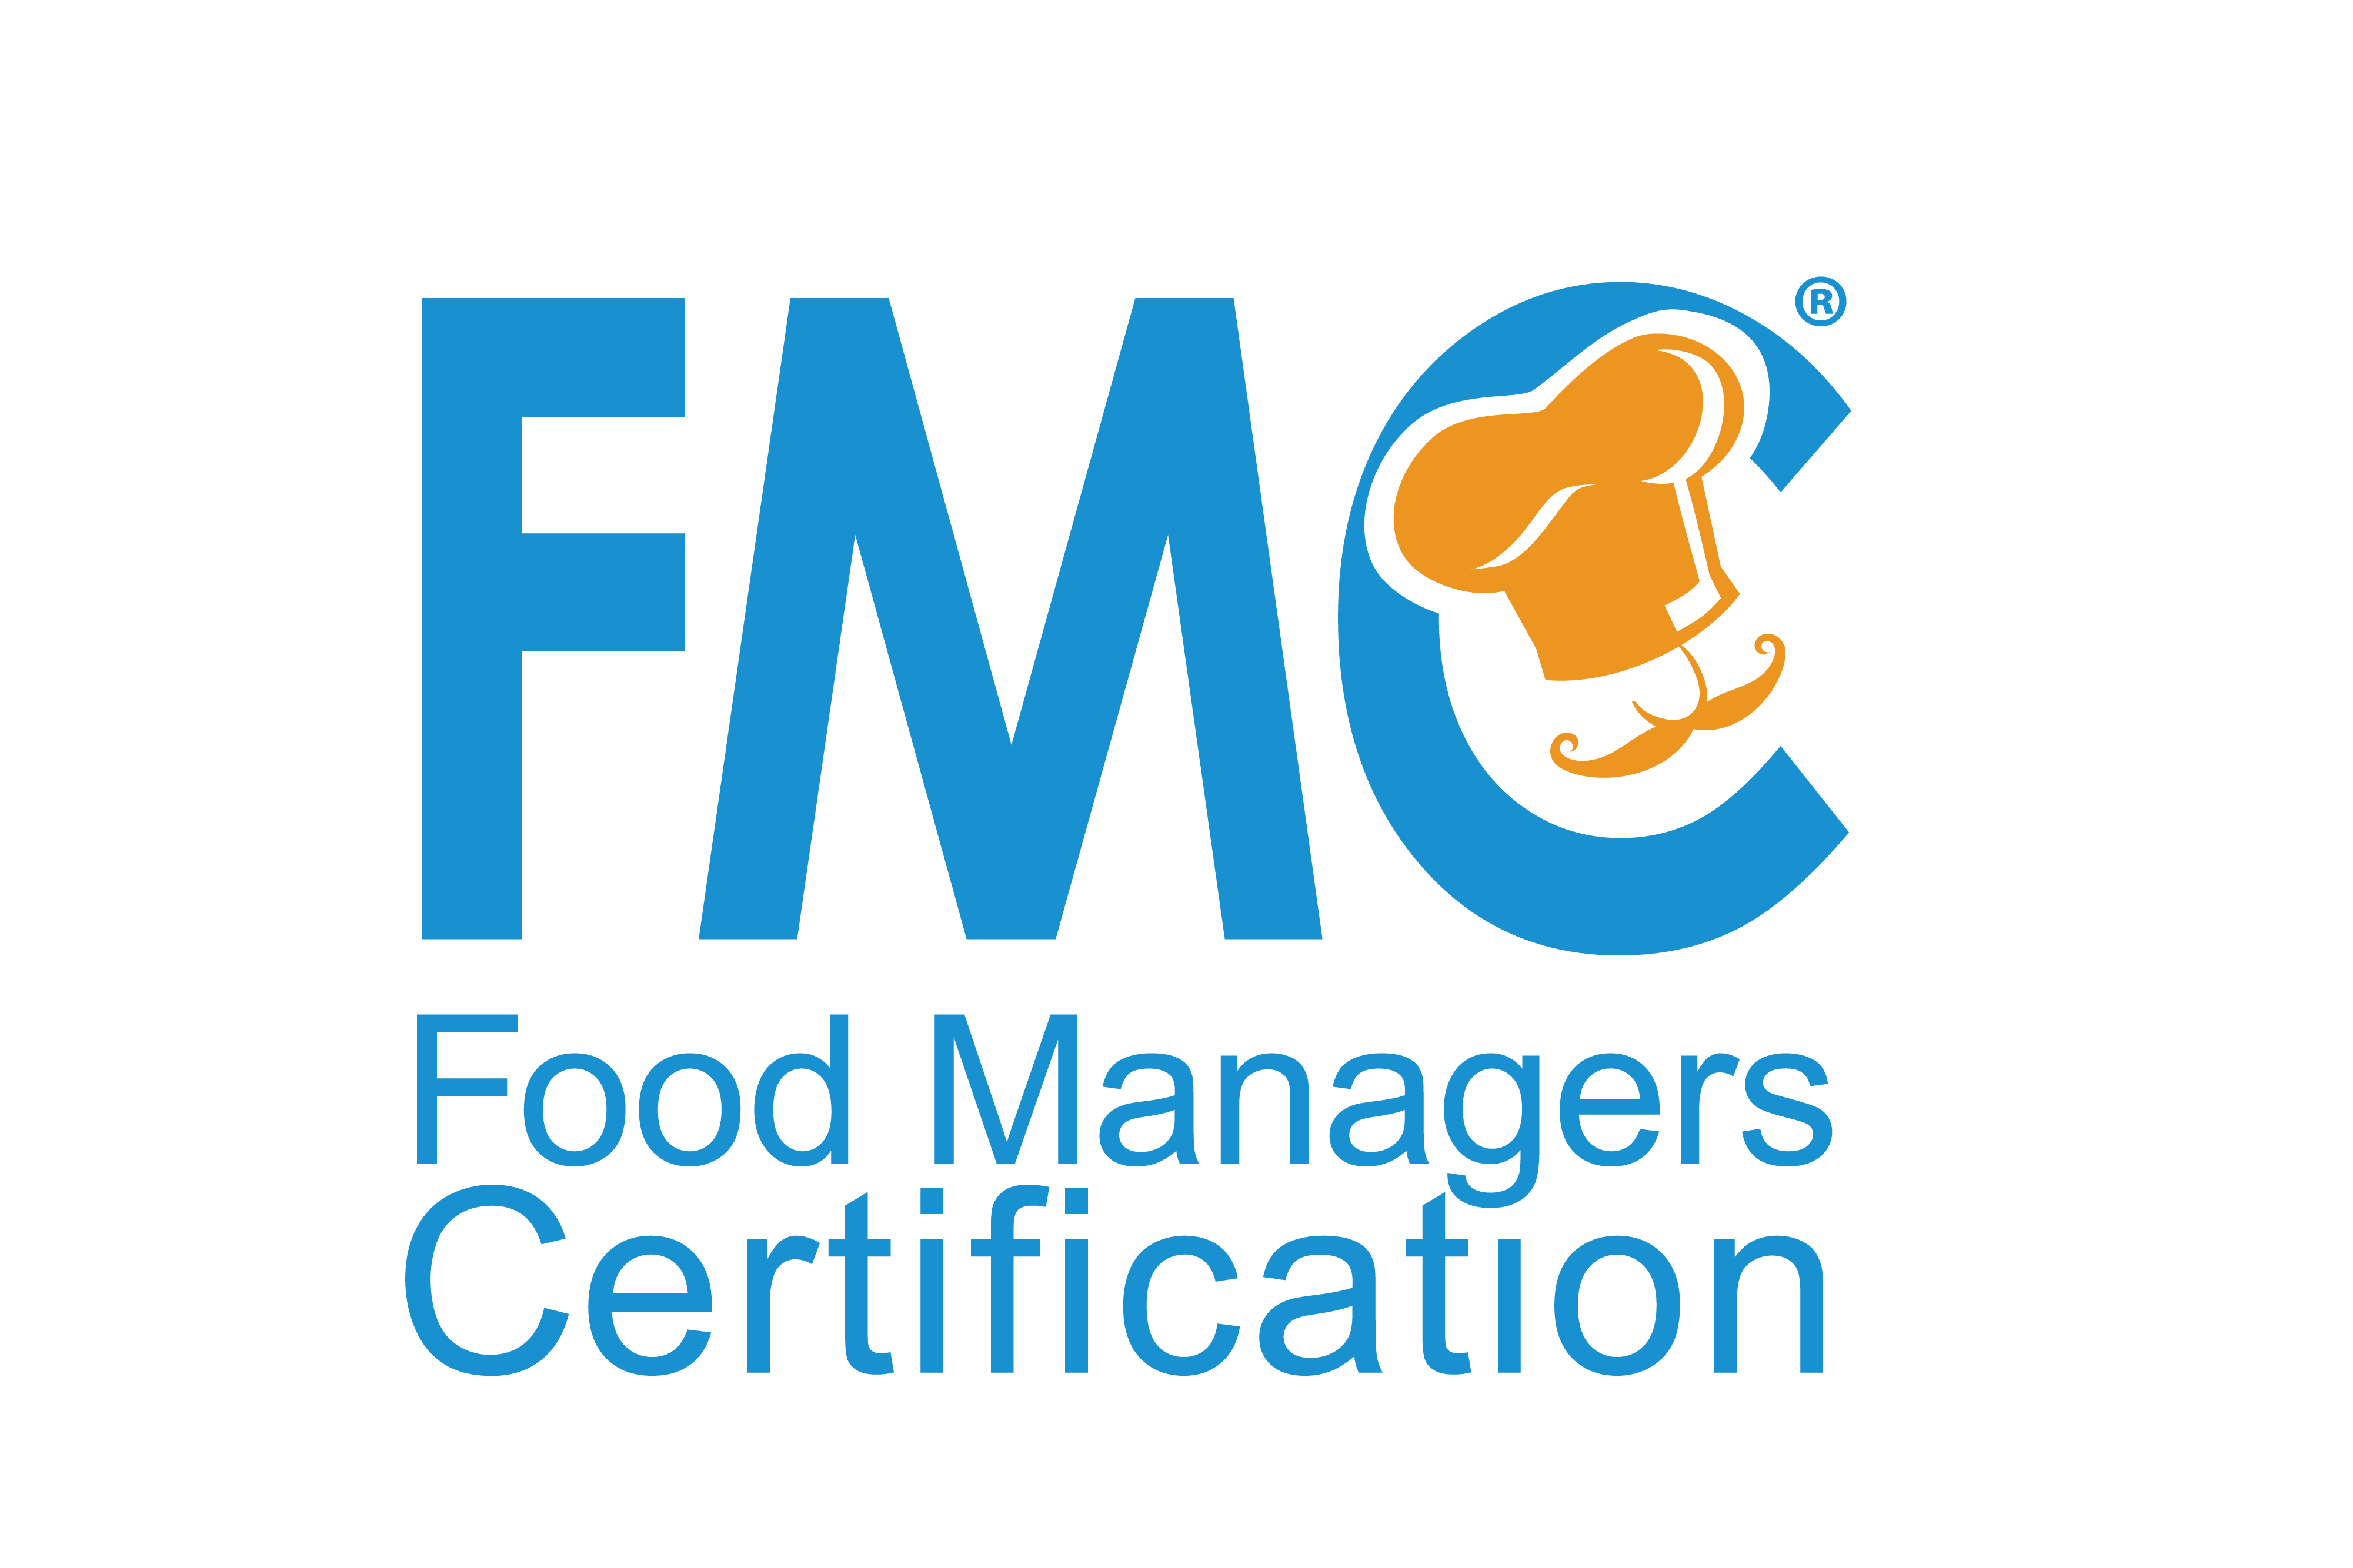 Food Managers Certification